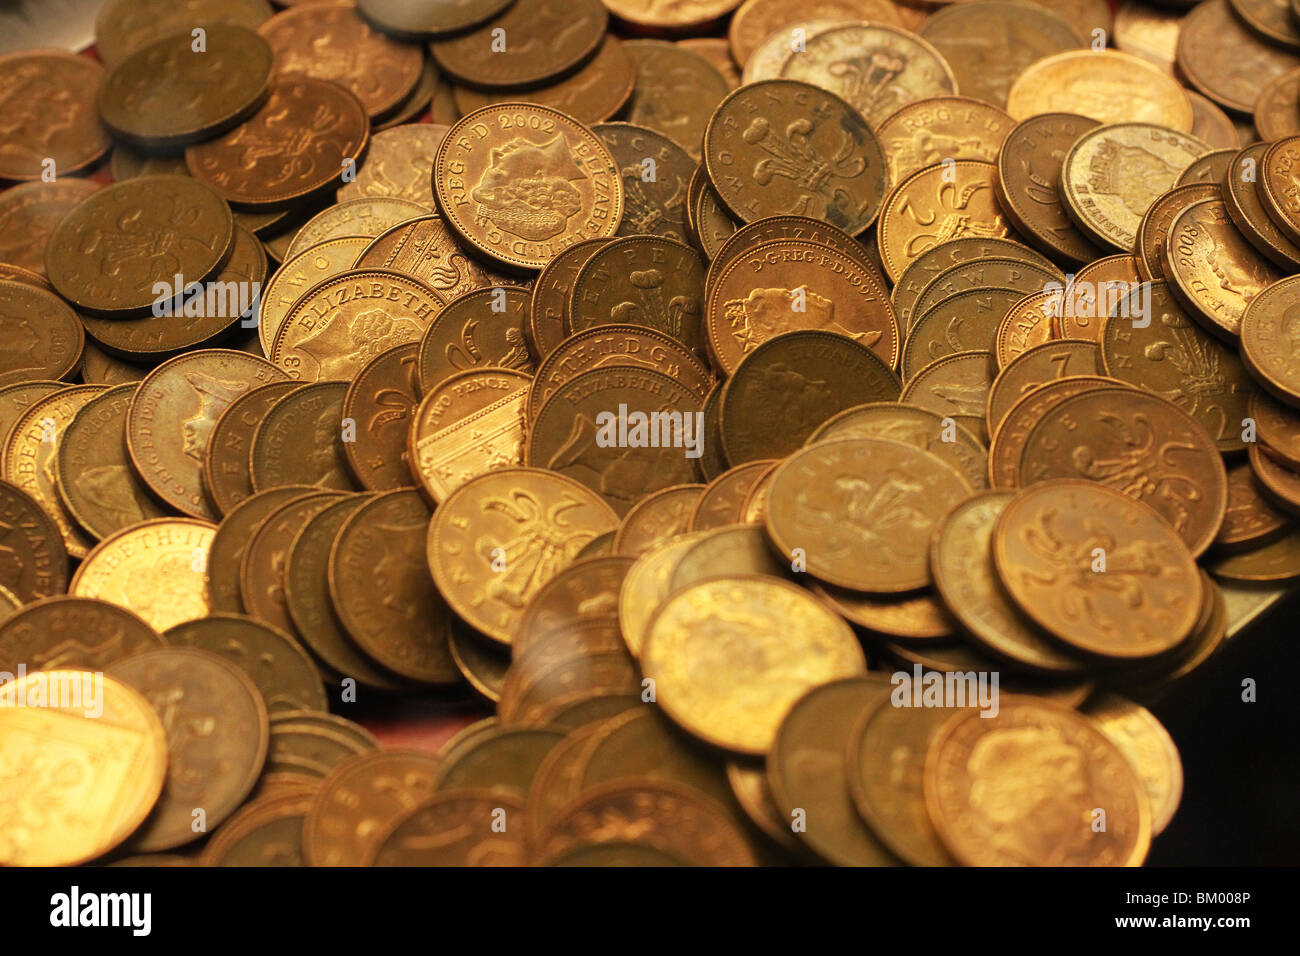 Two pence coins in amusement machine. Stock Photo